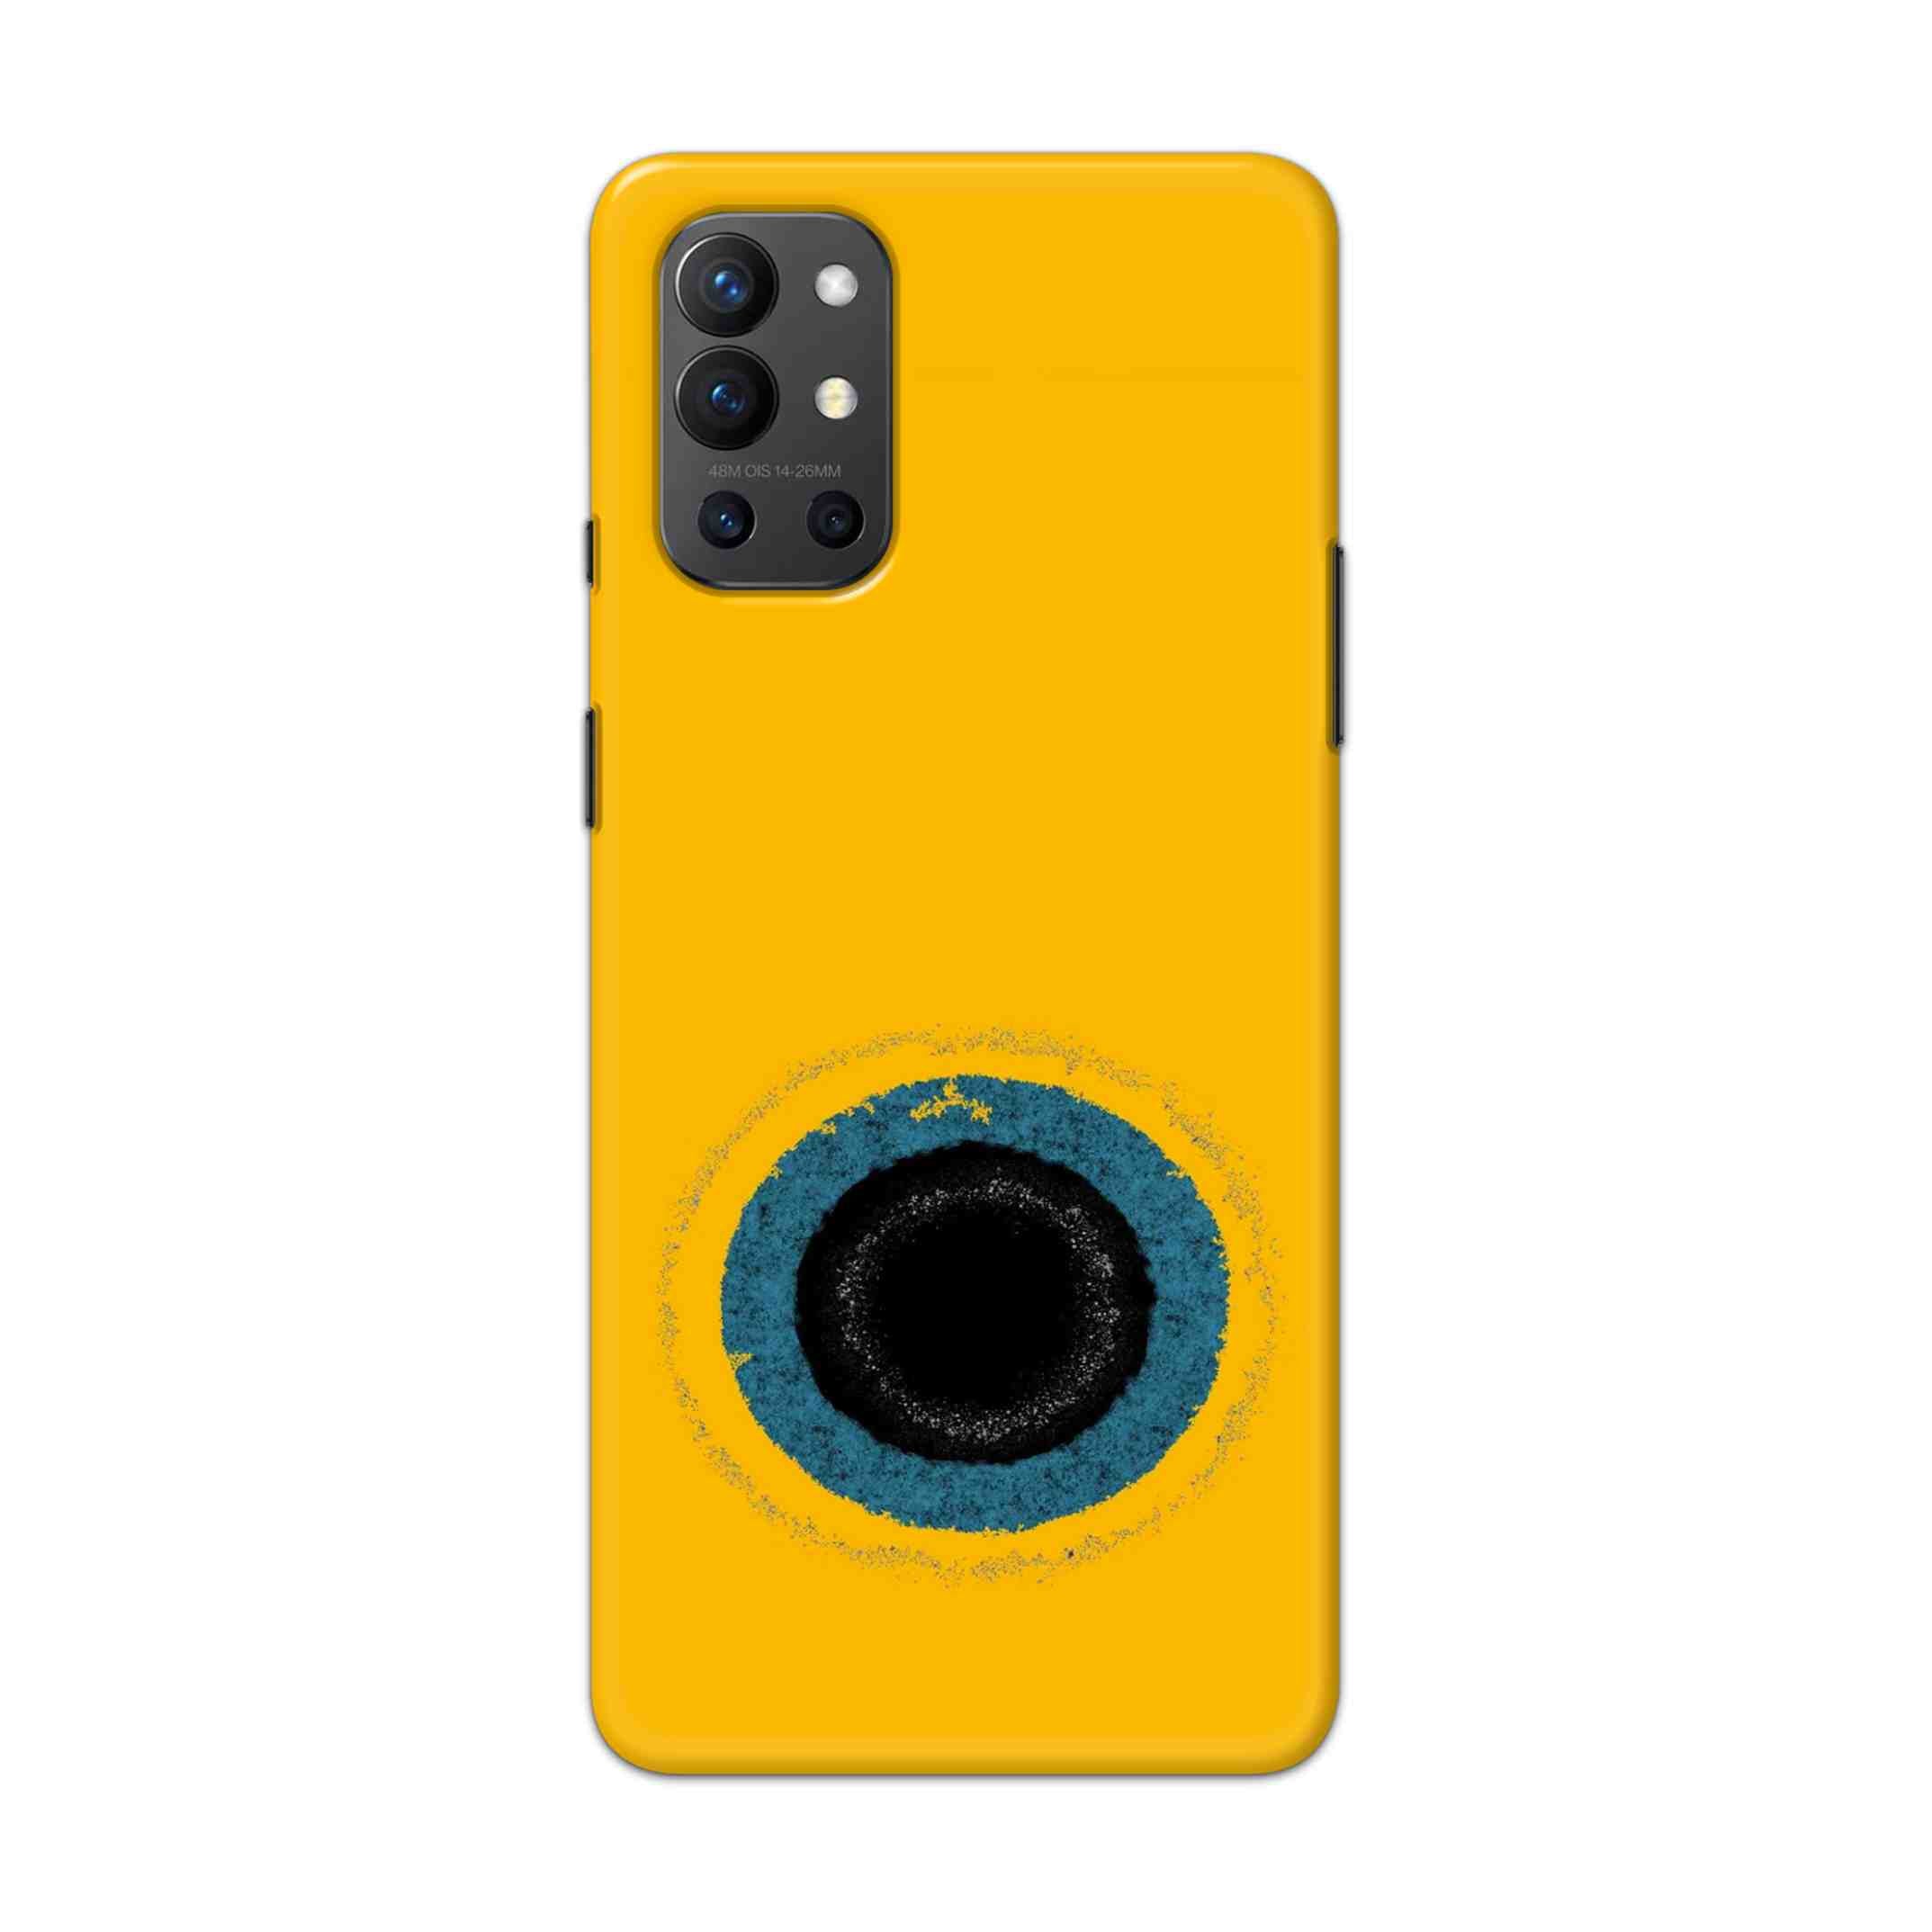 Buy Dark Hole With Yellow Background Hard Back Mobile Phone Case Cover For OnePlus 9R / 8T Online